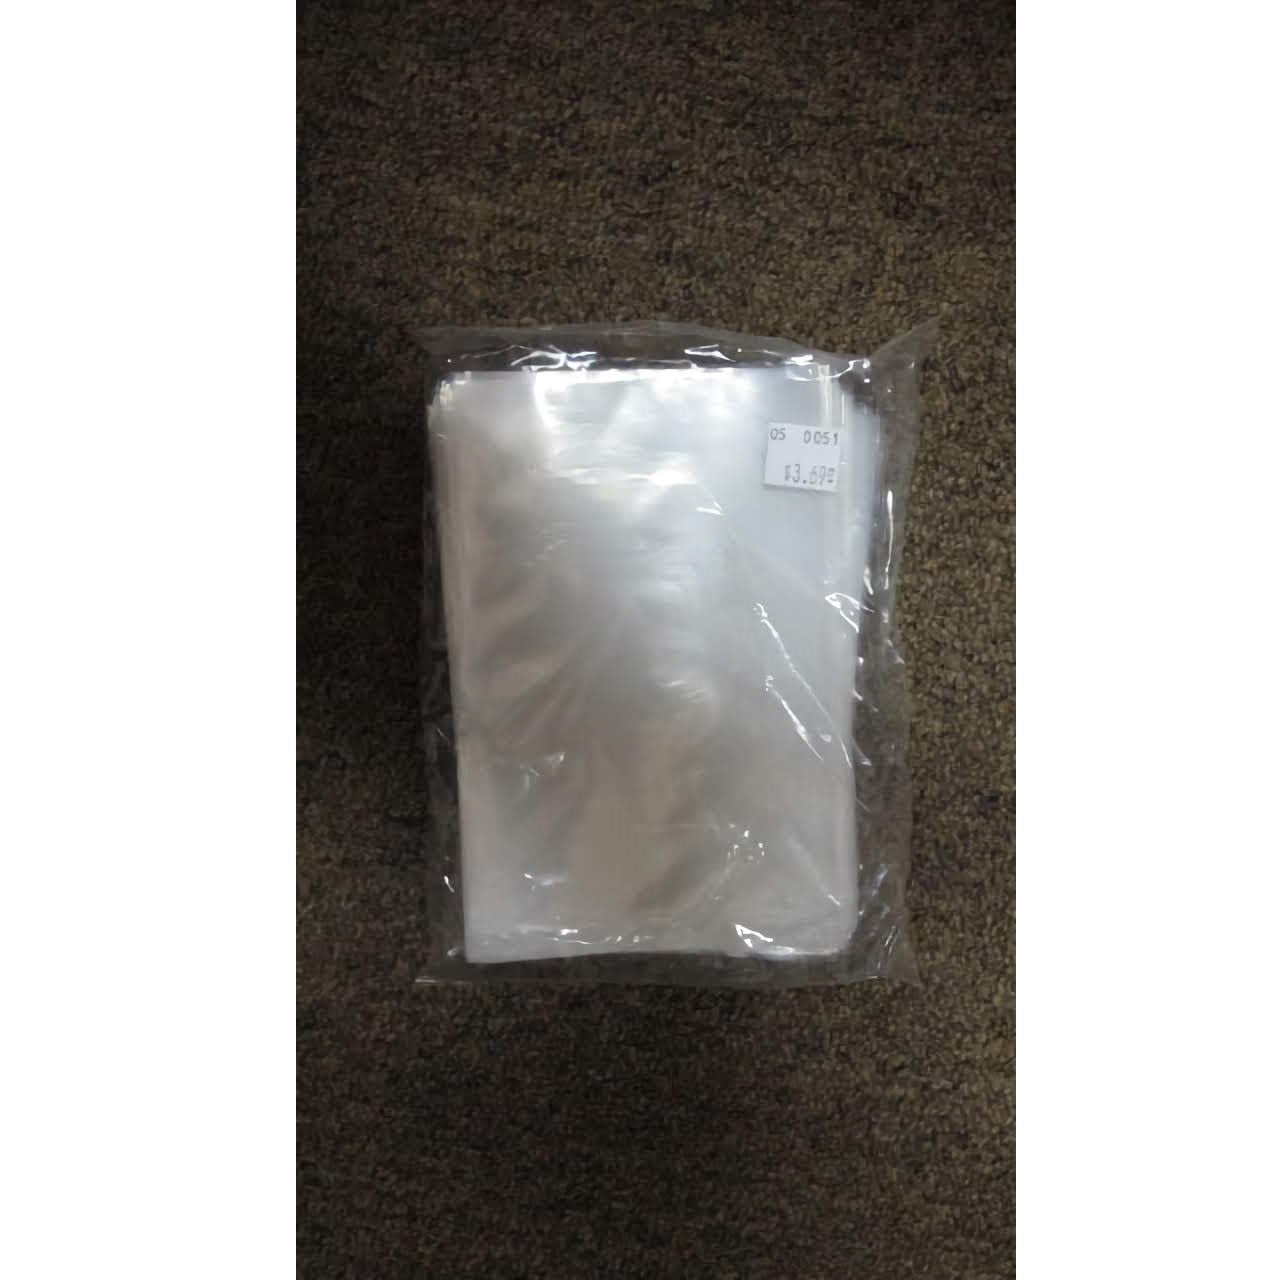 A pack of 100 clear poly bags suitable for suckers, with a size label of 4 x 6 inches. The plastic is slightly reflective and semi-translucent, allowing some light to pass through and give a glimpse of the bags inside.